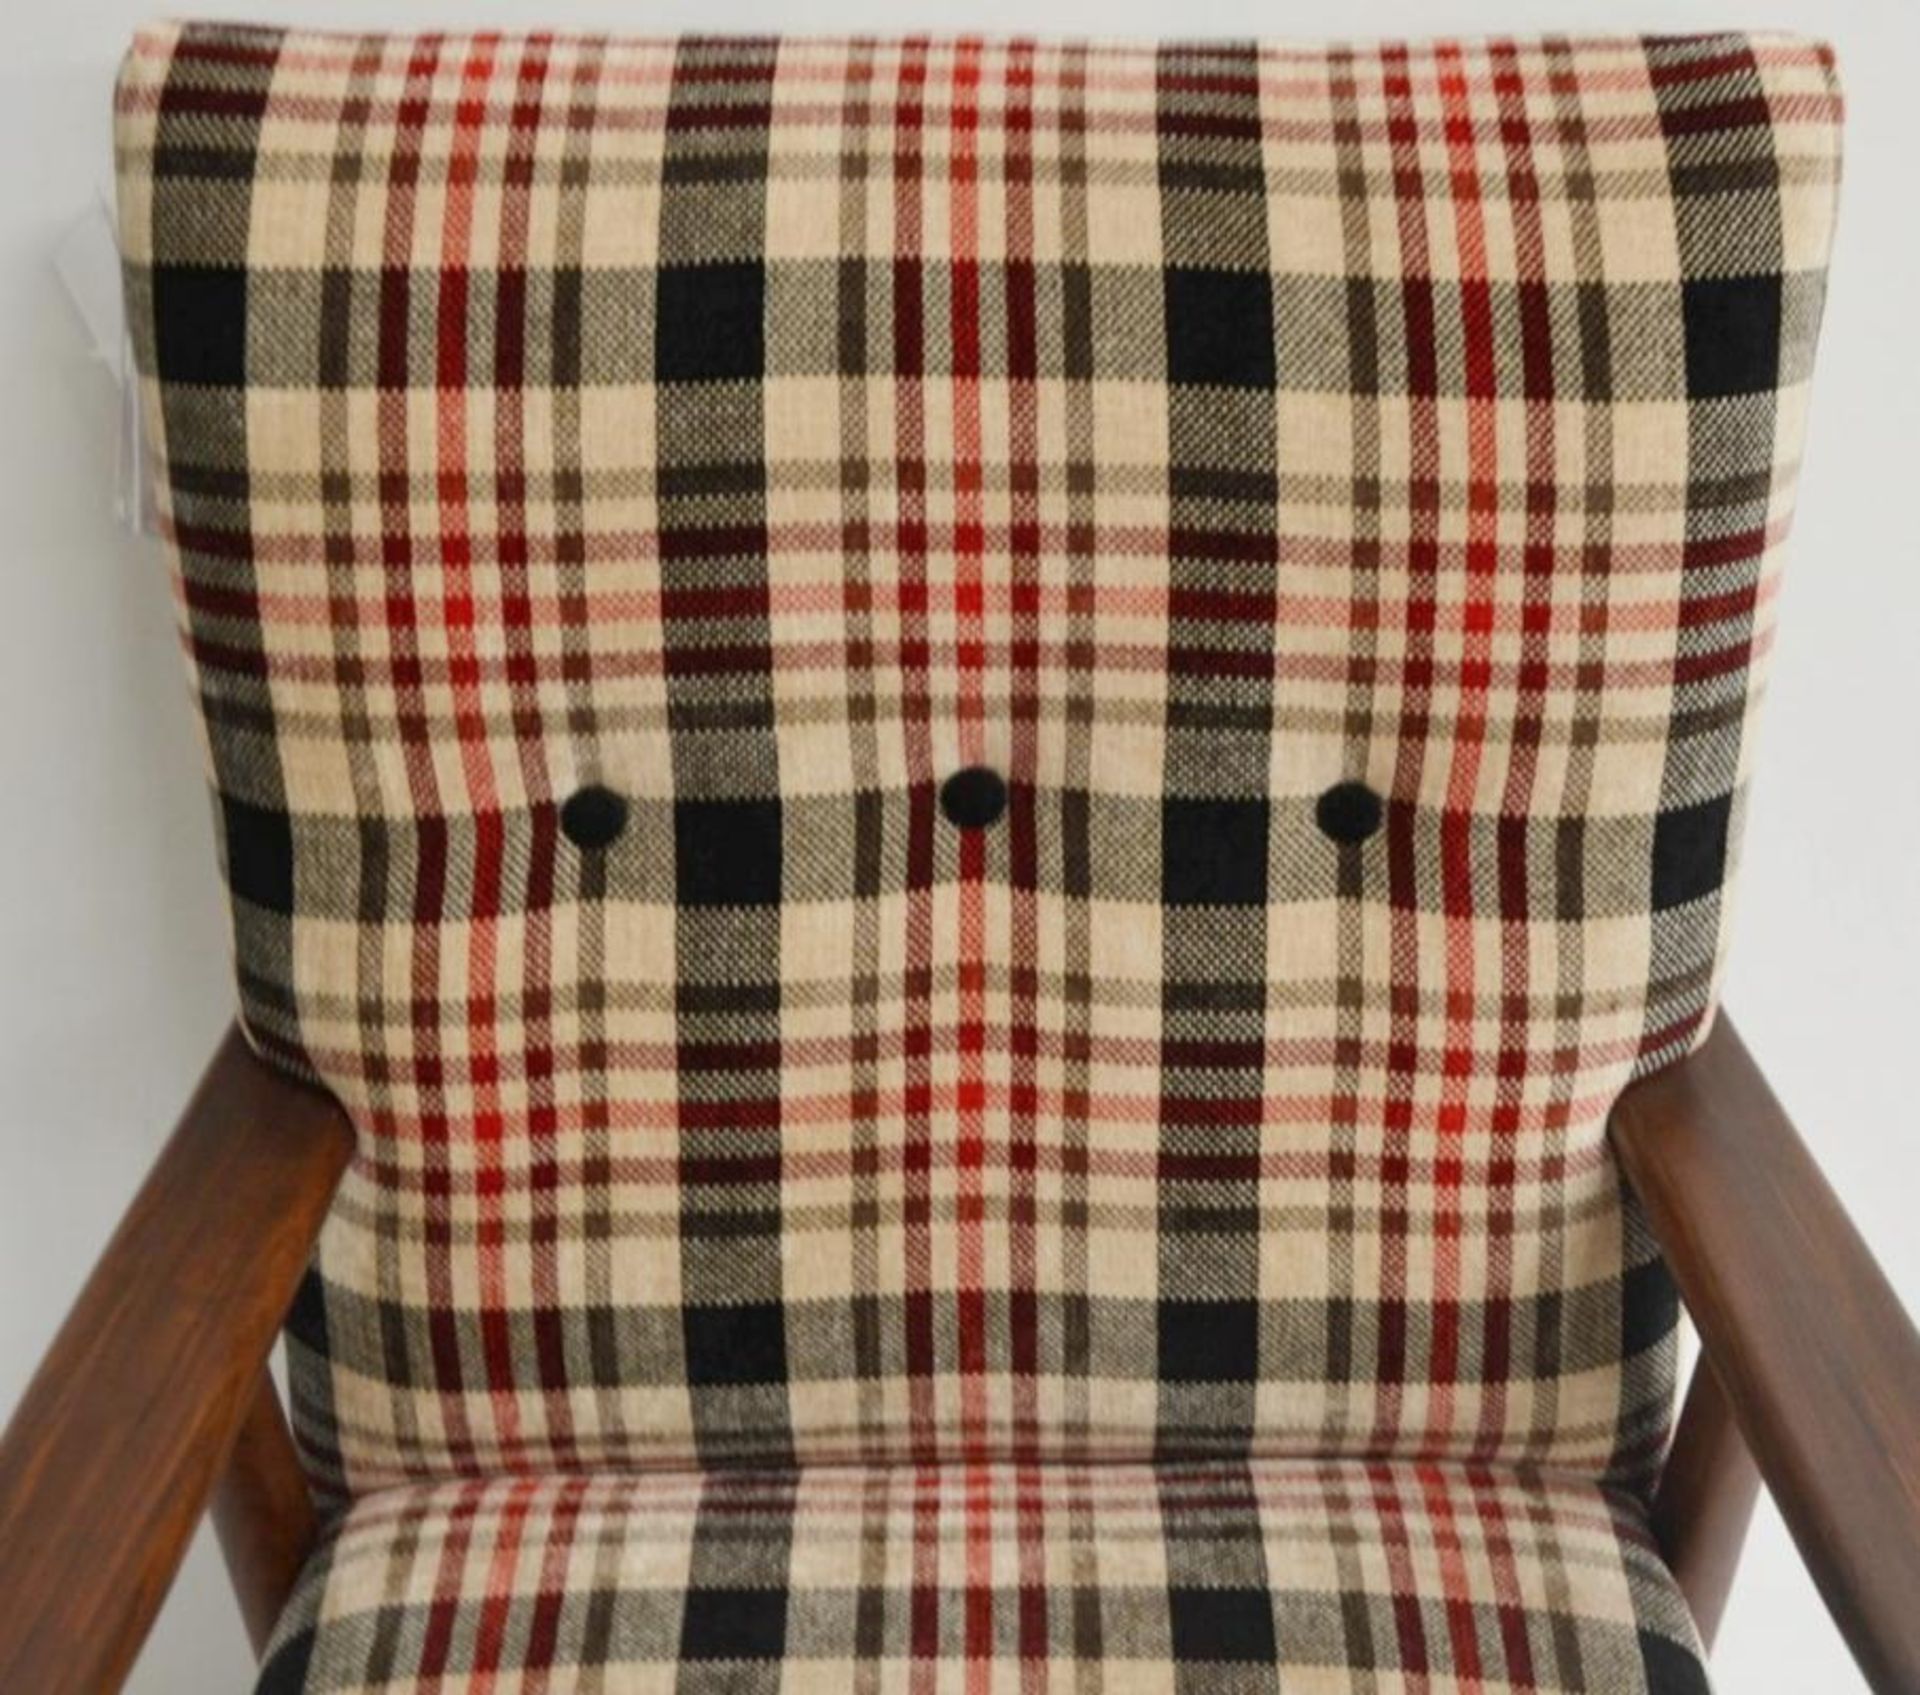 1 x JAB King Upholstery Mid Century Chair Upholstered In A 'Bourbon Pattern' - Dimensions (approx): - Image 4 of 9